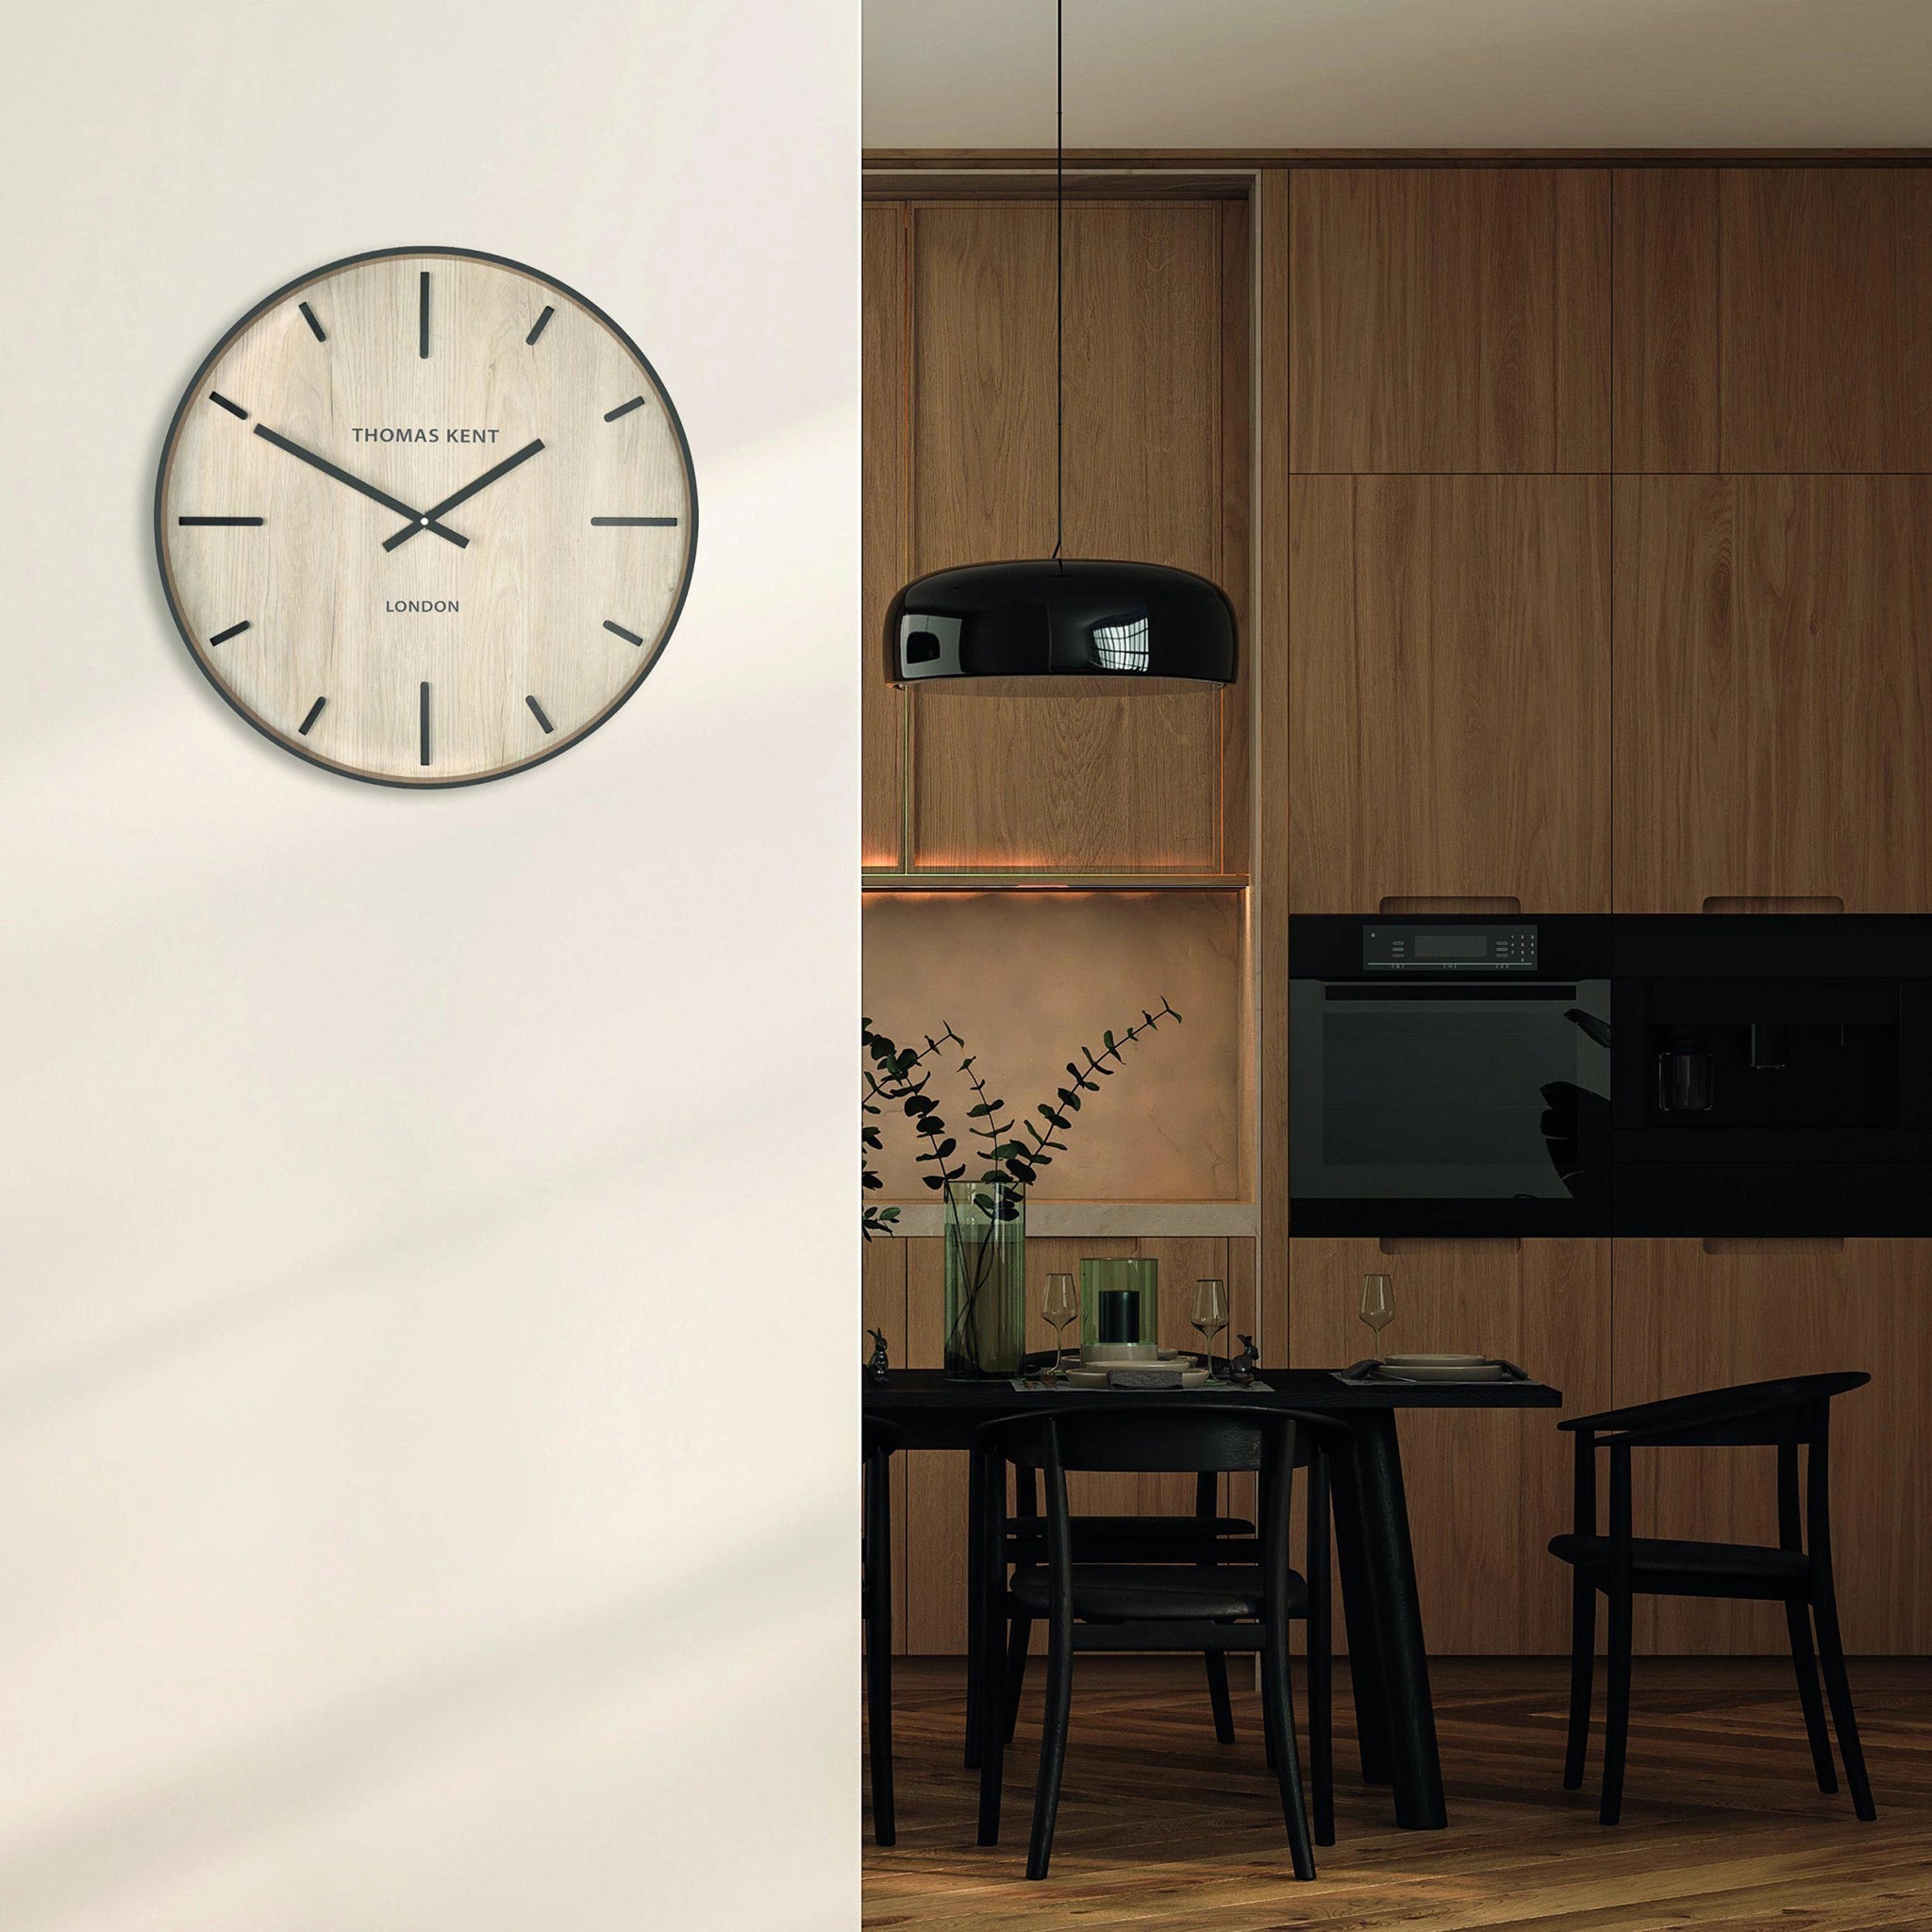 A wall clock with light wood effect face and simple number markings and hands on wall